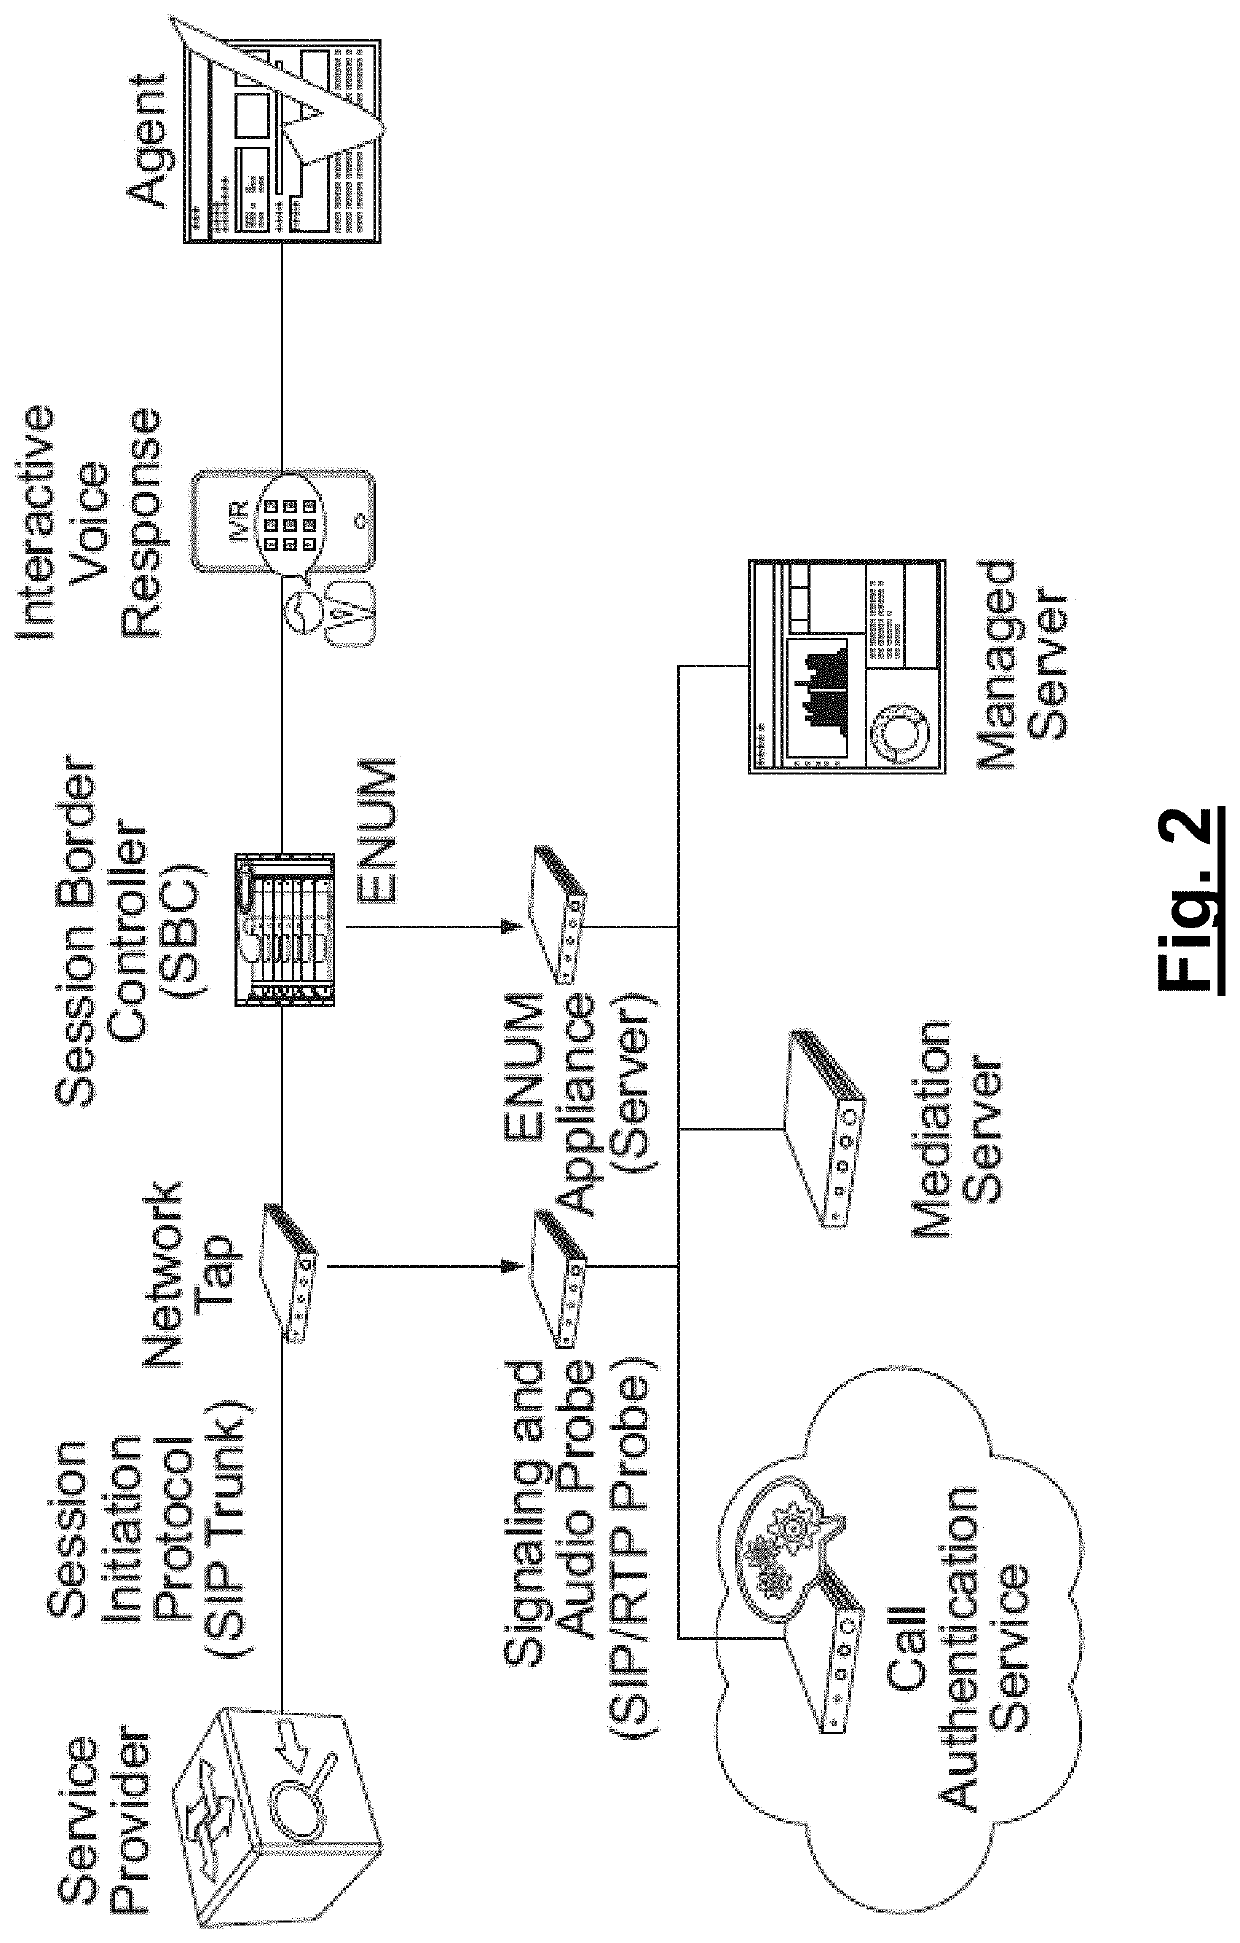 Call Authentication Service Systems and Methods